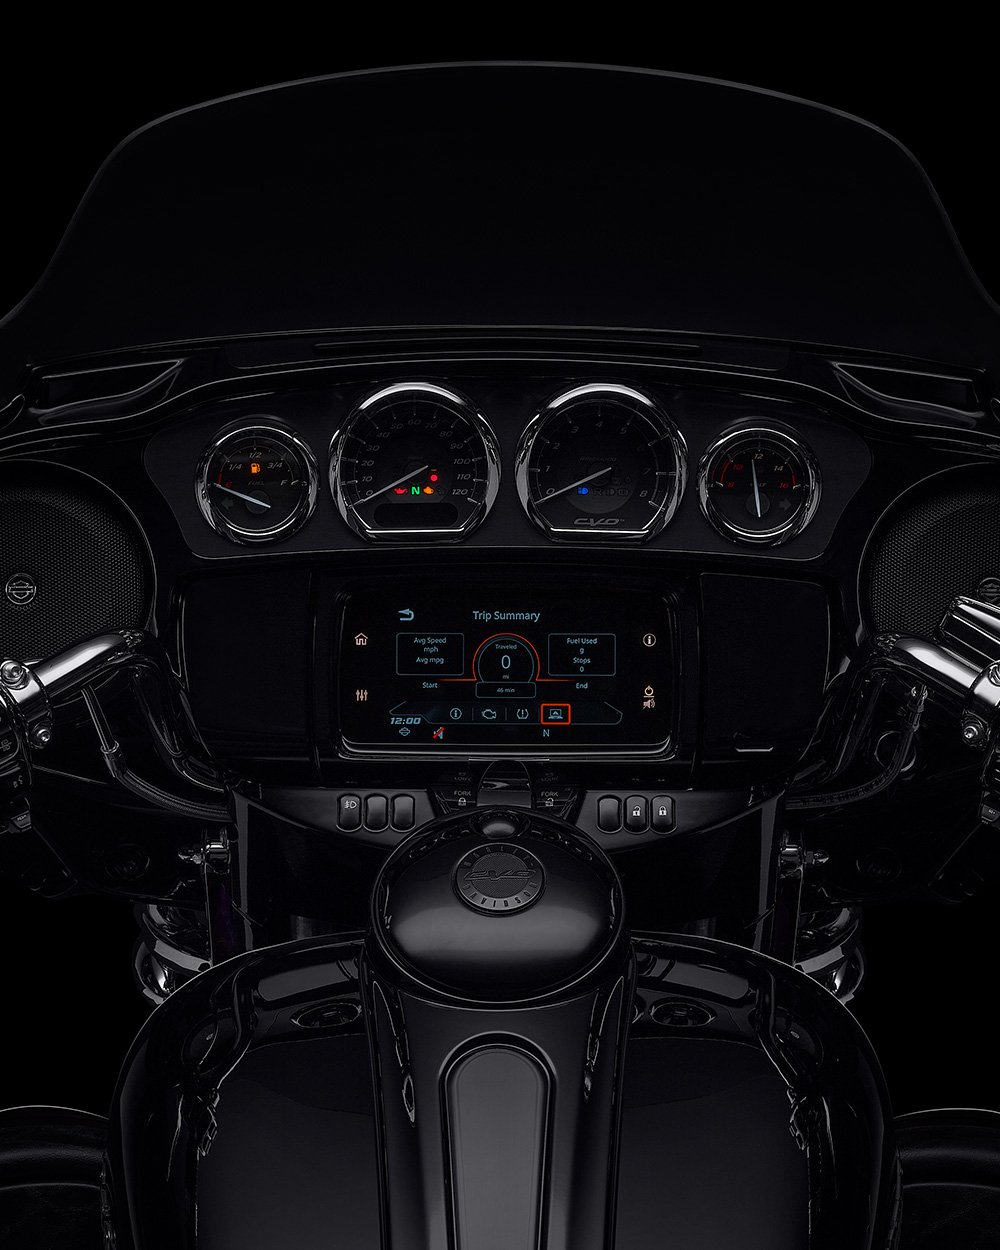 Boom Box GTS Infortainment System on a CVO Limited motorcycle